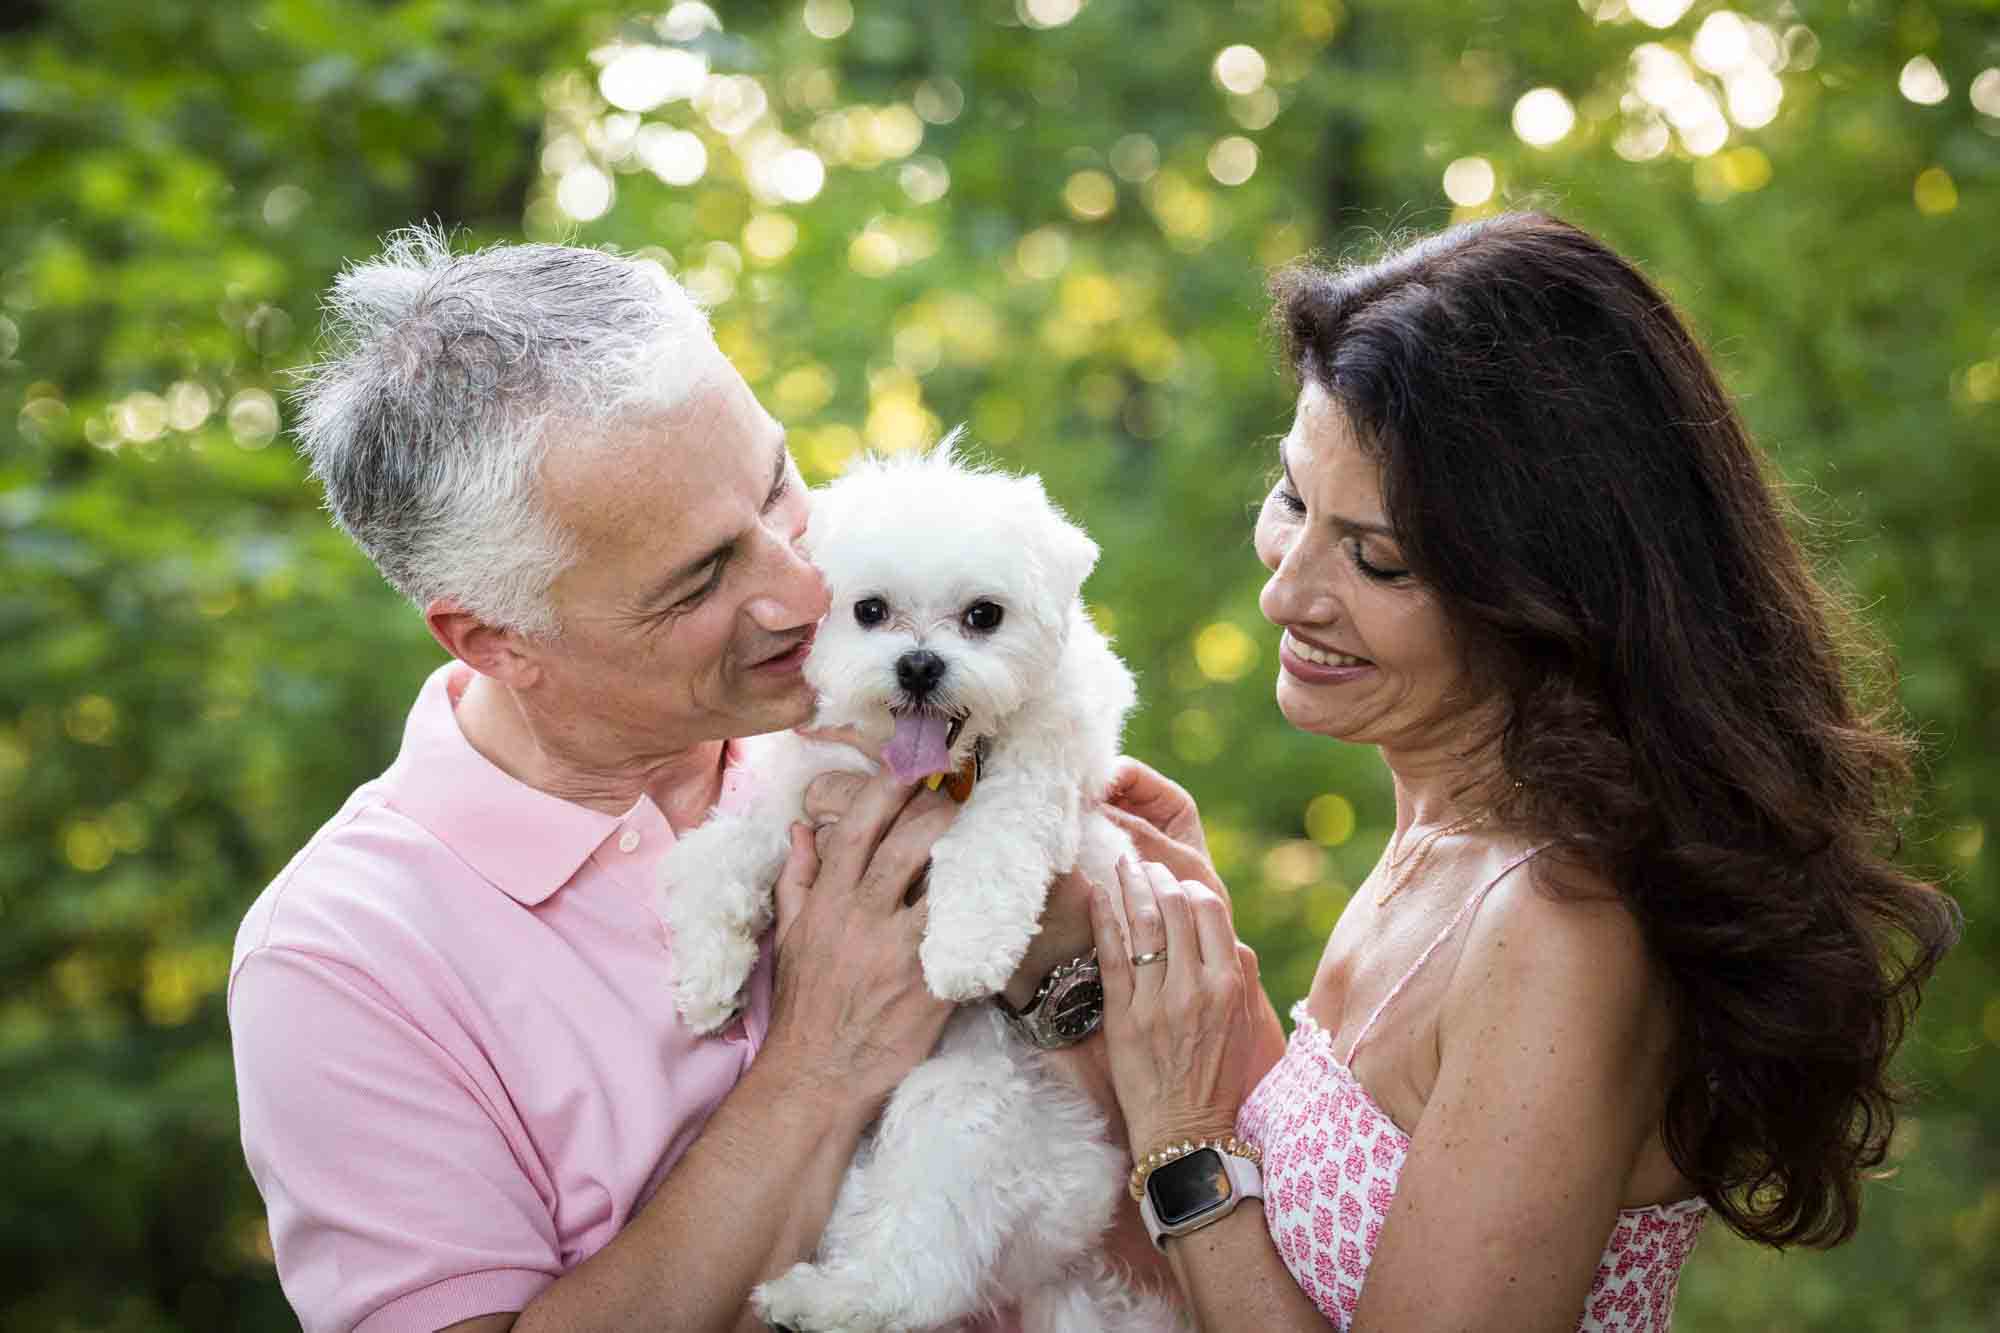 Couple focused on small, white dog during a Forest Park family photo shoot